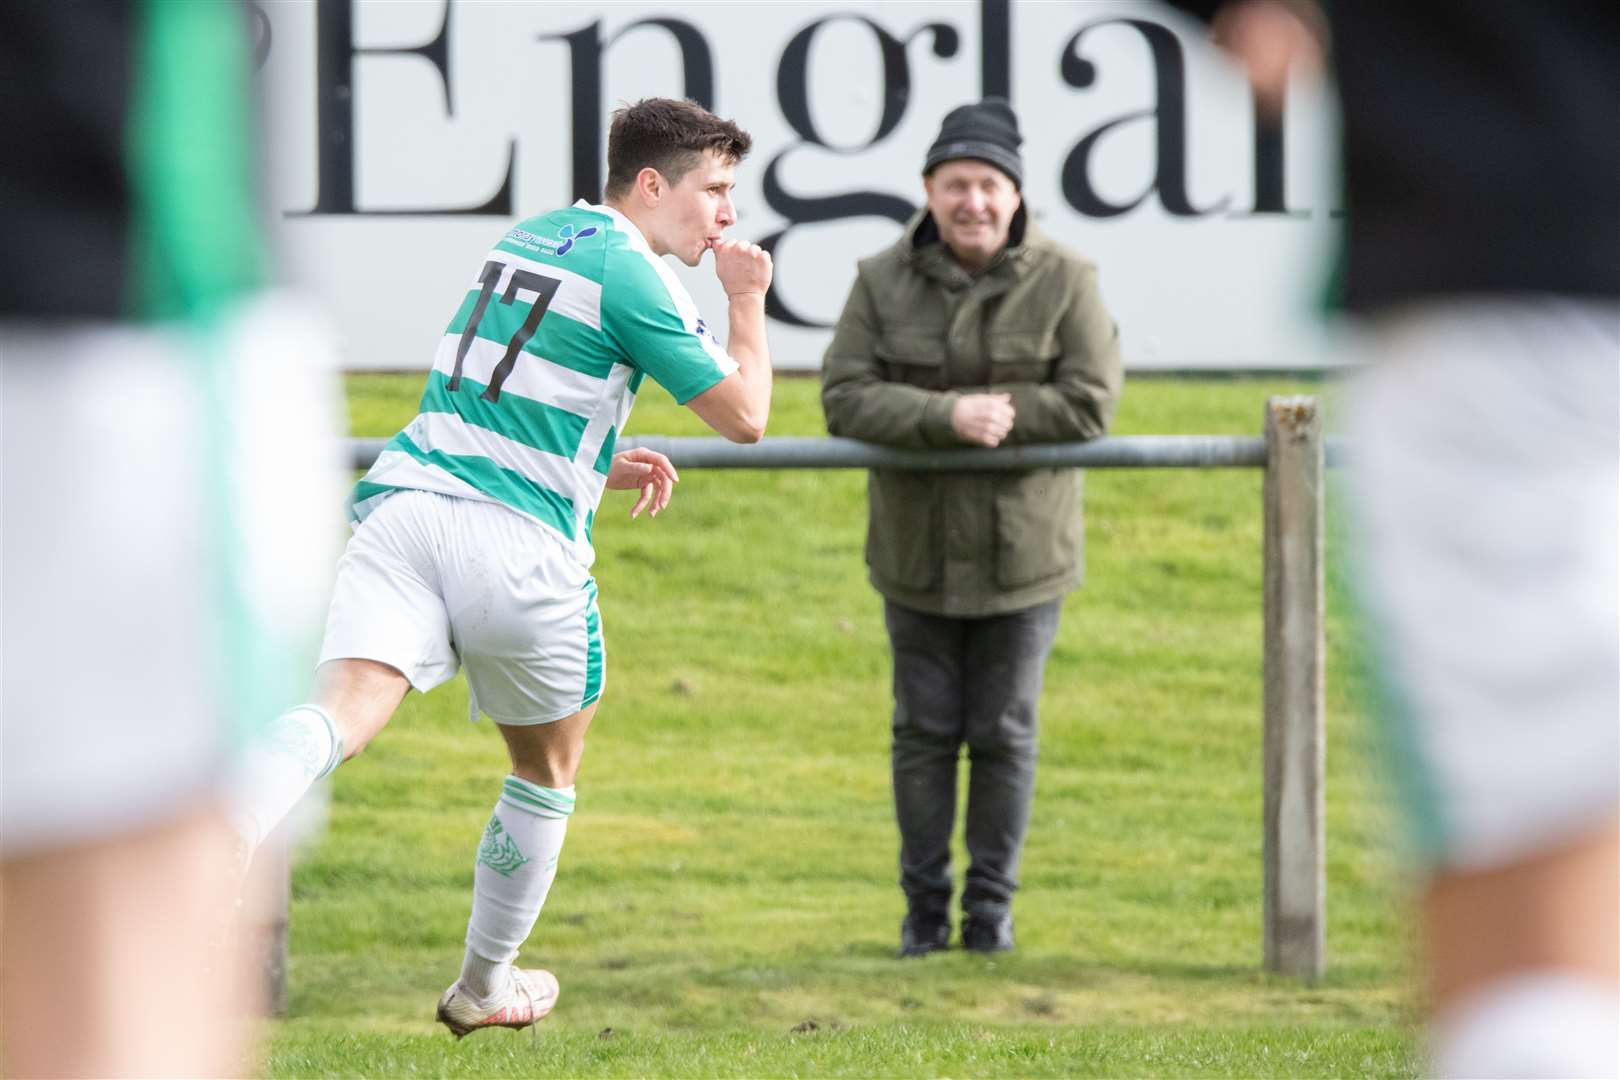 Buckie Thistle's Max Barry scores the Jags third goal of the afternoon. ..Forres Mechanics FC (2) vs Buckie Thistle FC (3) - Highland Football League 22/23 - Mosset Park, Forres 01/04/23...Picture: Daniel Forsyth..